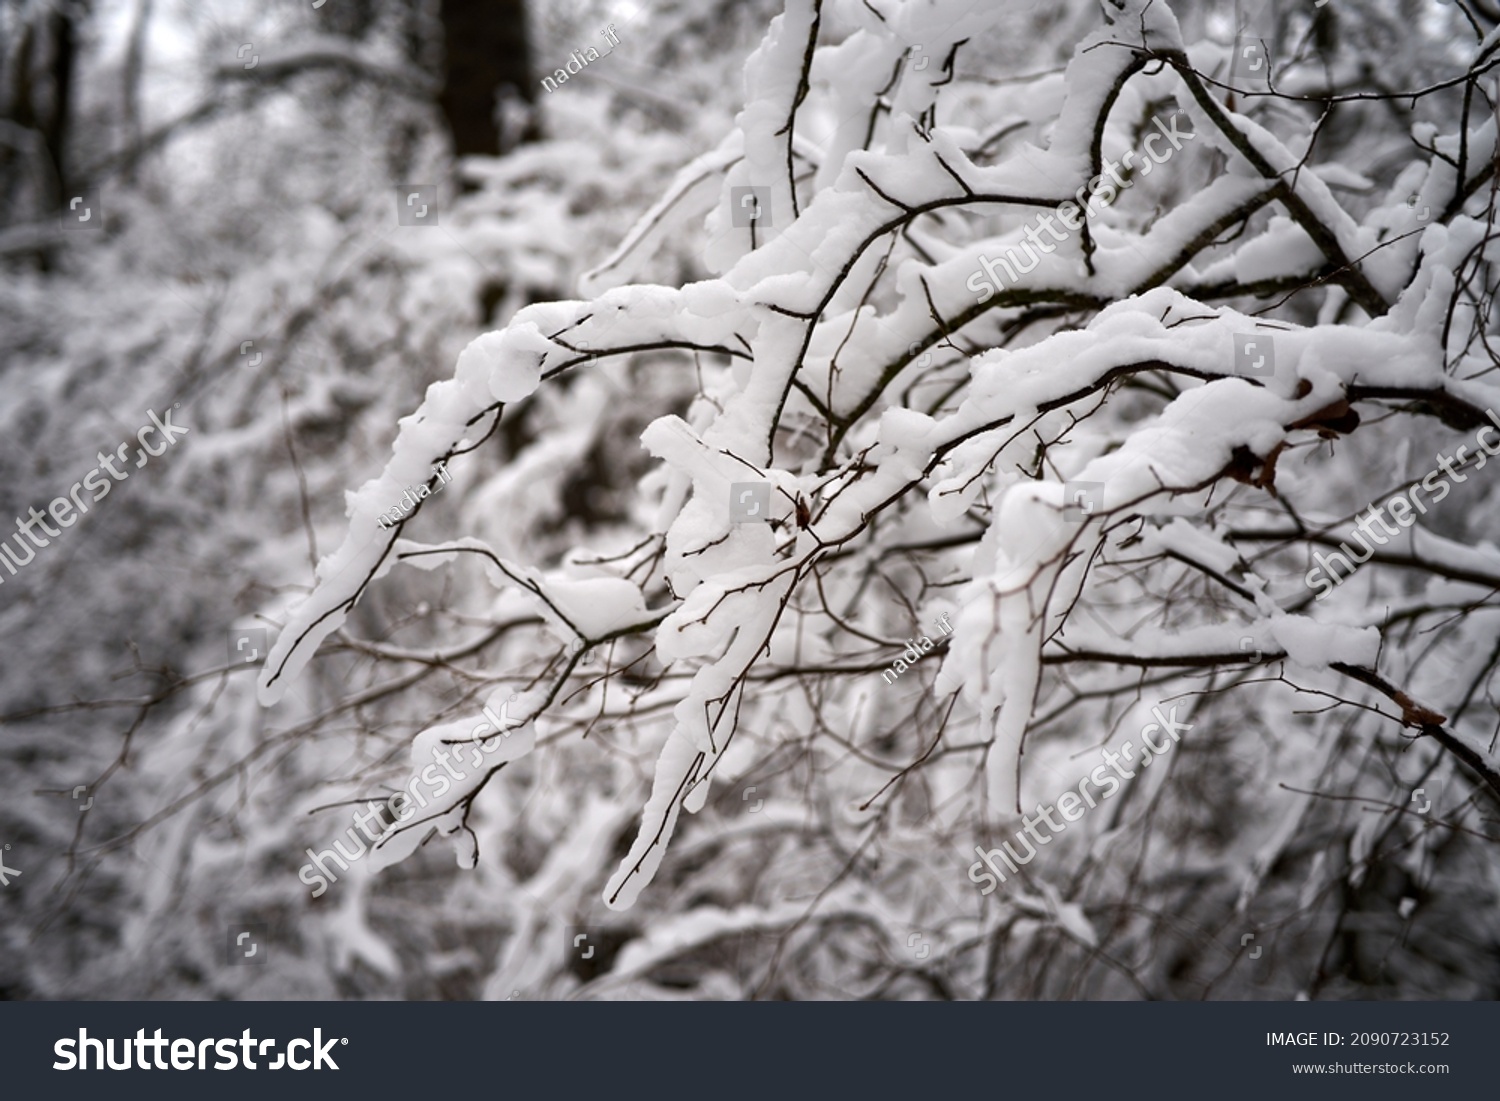 White snow on a bare tree branches on a frosty winter day, close up. Natural background. Selective botanical background. High quality photo #2090723152